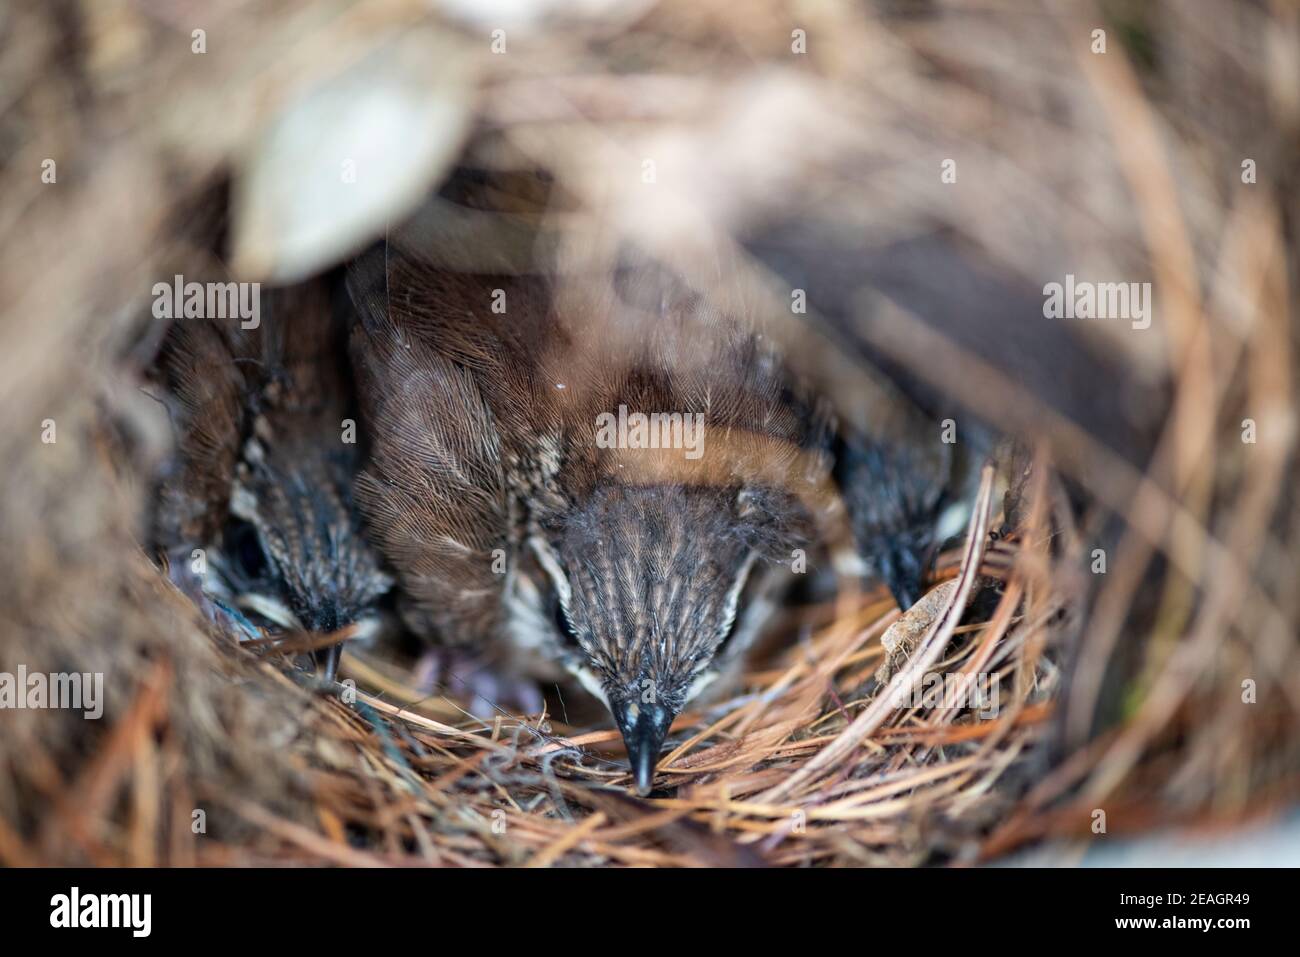 Carolina Wren (Thryothorus Ludovicianus) Baby Chicks in Bird Nest. Series of consecutive days showing growth, frame 11 of 12. Stock Photo